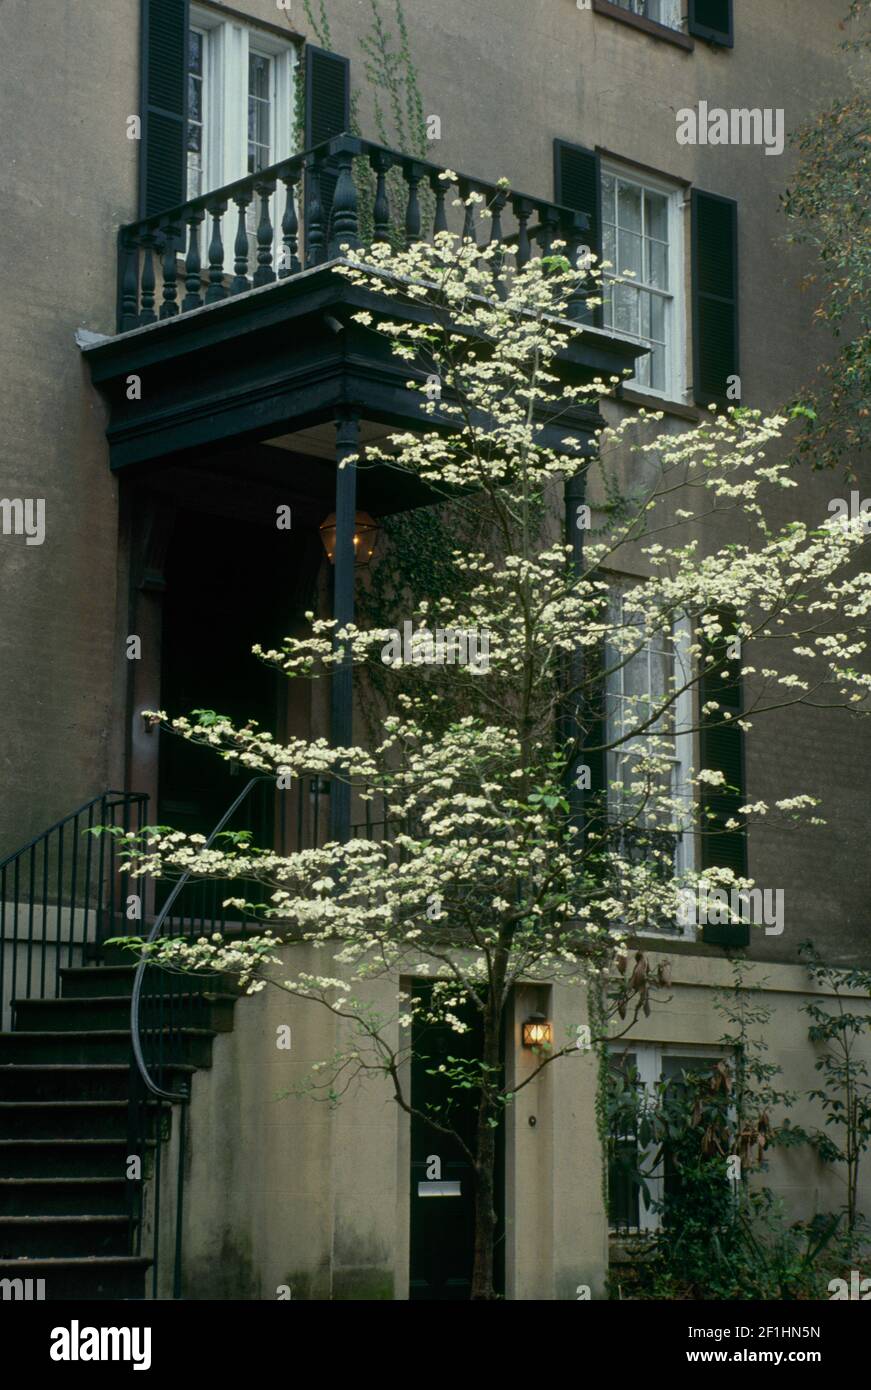 Blooming dogwood tree in front of a townhouse in historical Savannah Georgia, USA Stock Photo